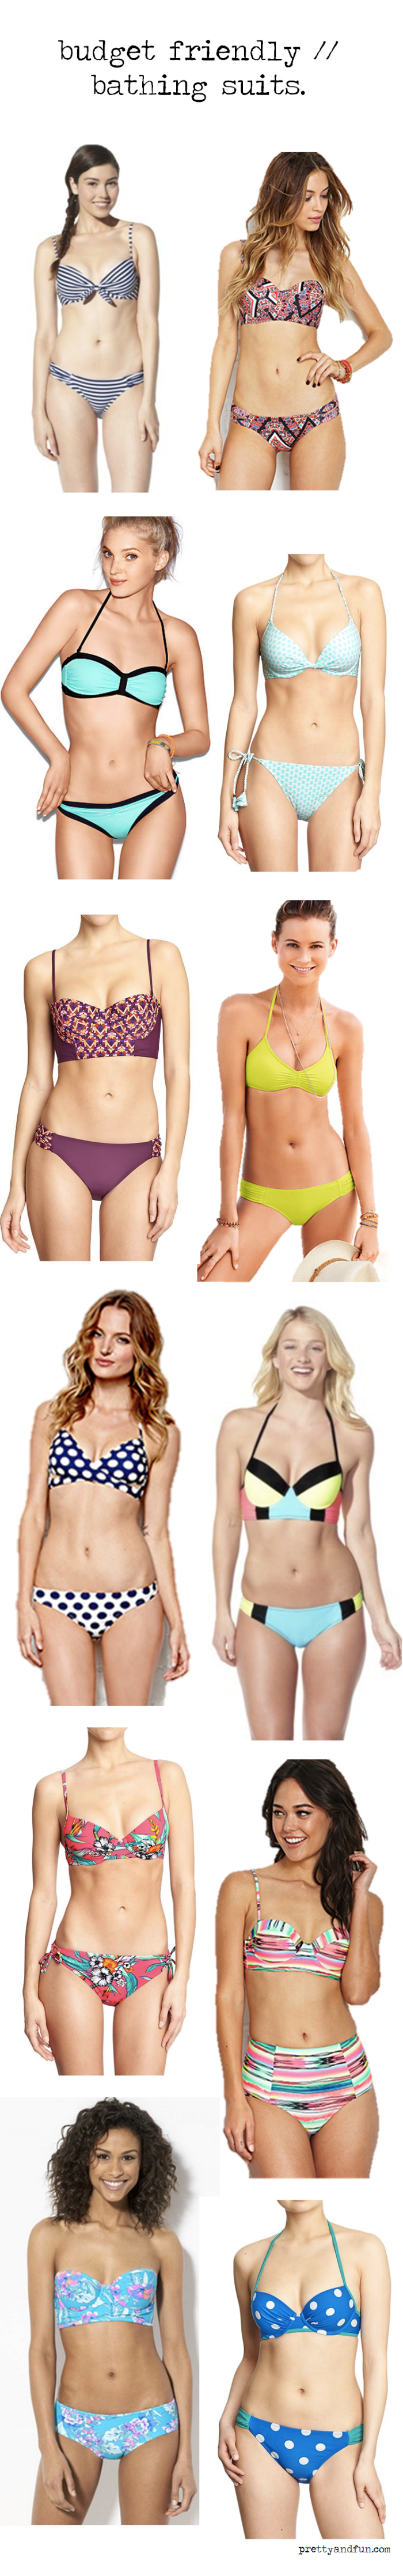 Budget-Friendly-Bathing-Suits